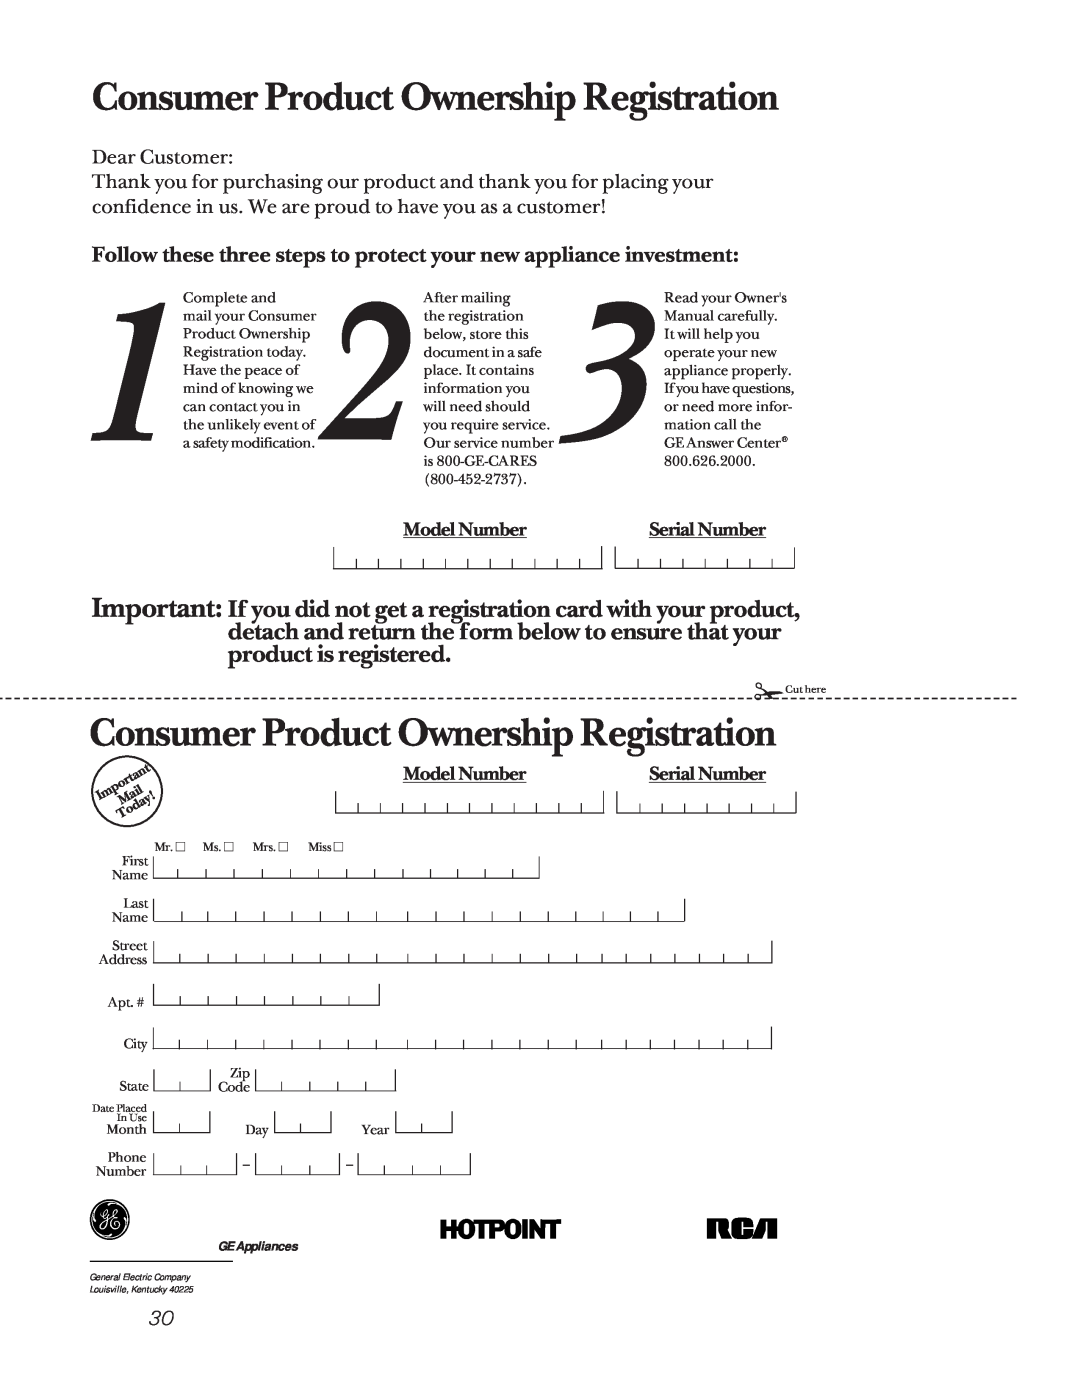 GE JTP18, JKP56 Consumer Product Ownership Registration, Follow these three steps to protect your new appliance investment 